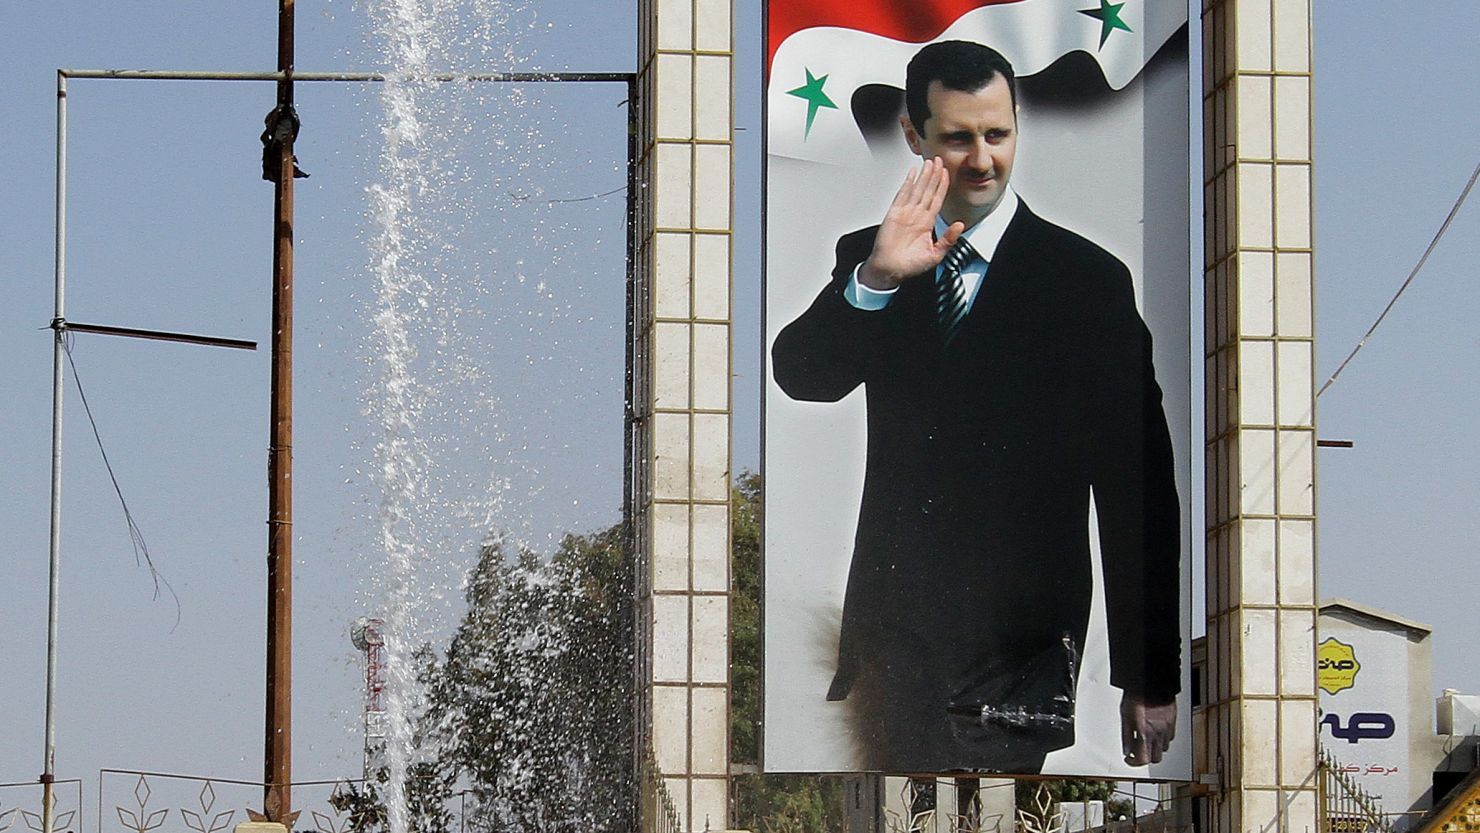 MME takes a deeper look into Syria and the impact of sanctions on the country.